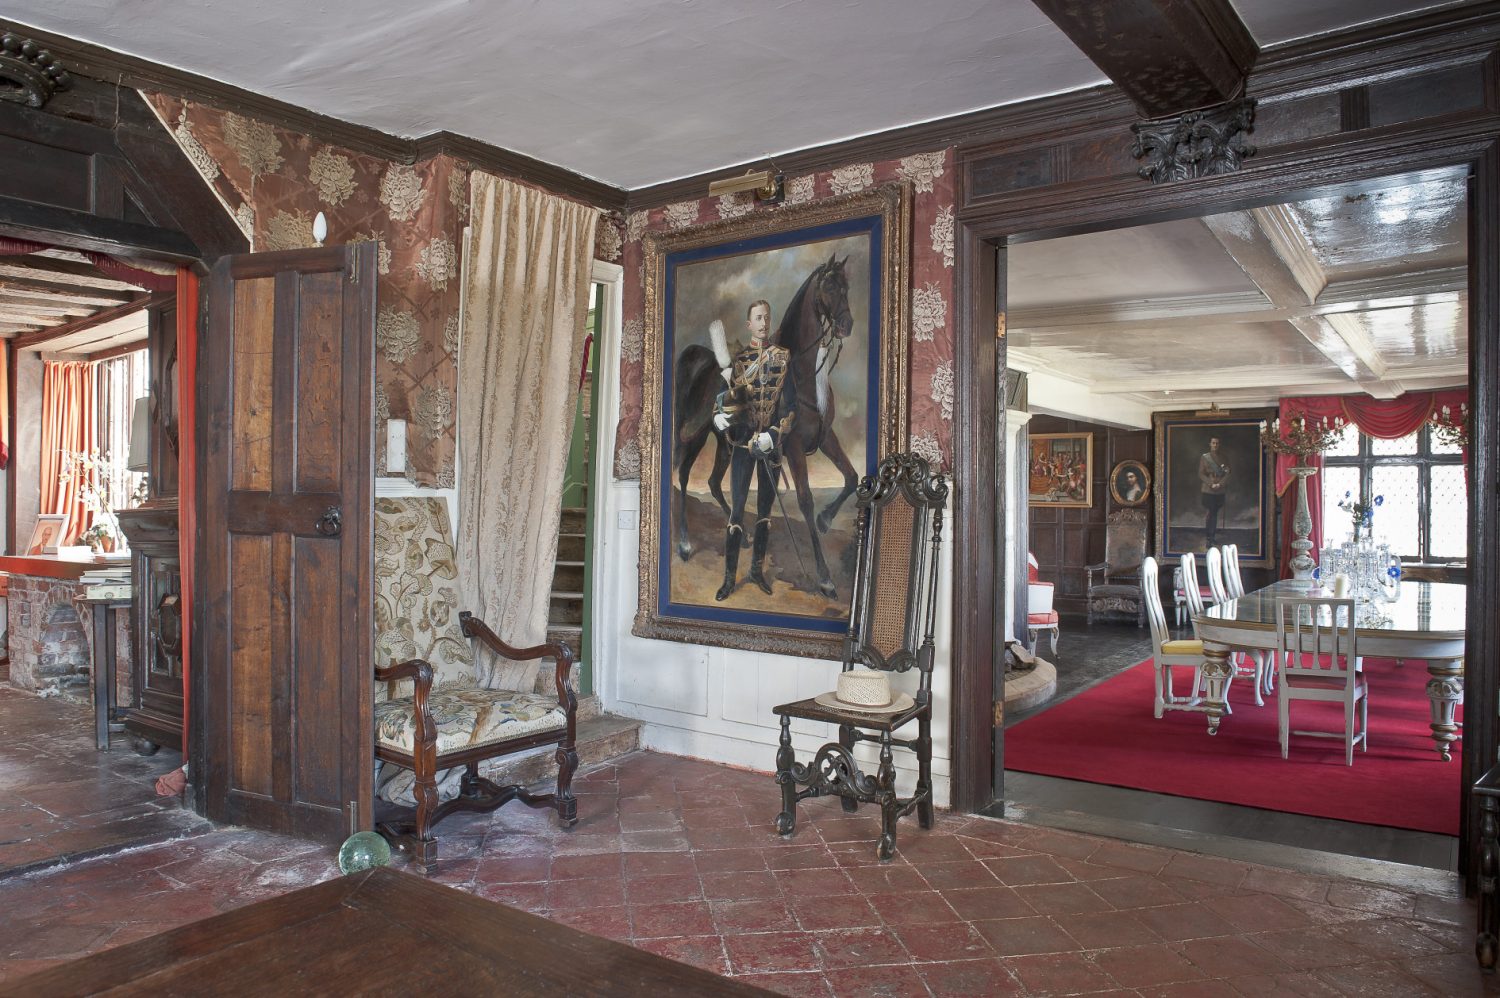 In the reception hall, dark oak timbers criss-cross the ceiling and form carved coronets above double doorways that give access to other parts of the house